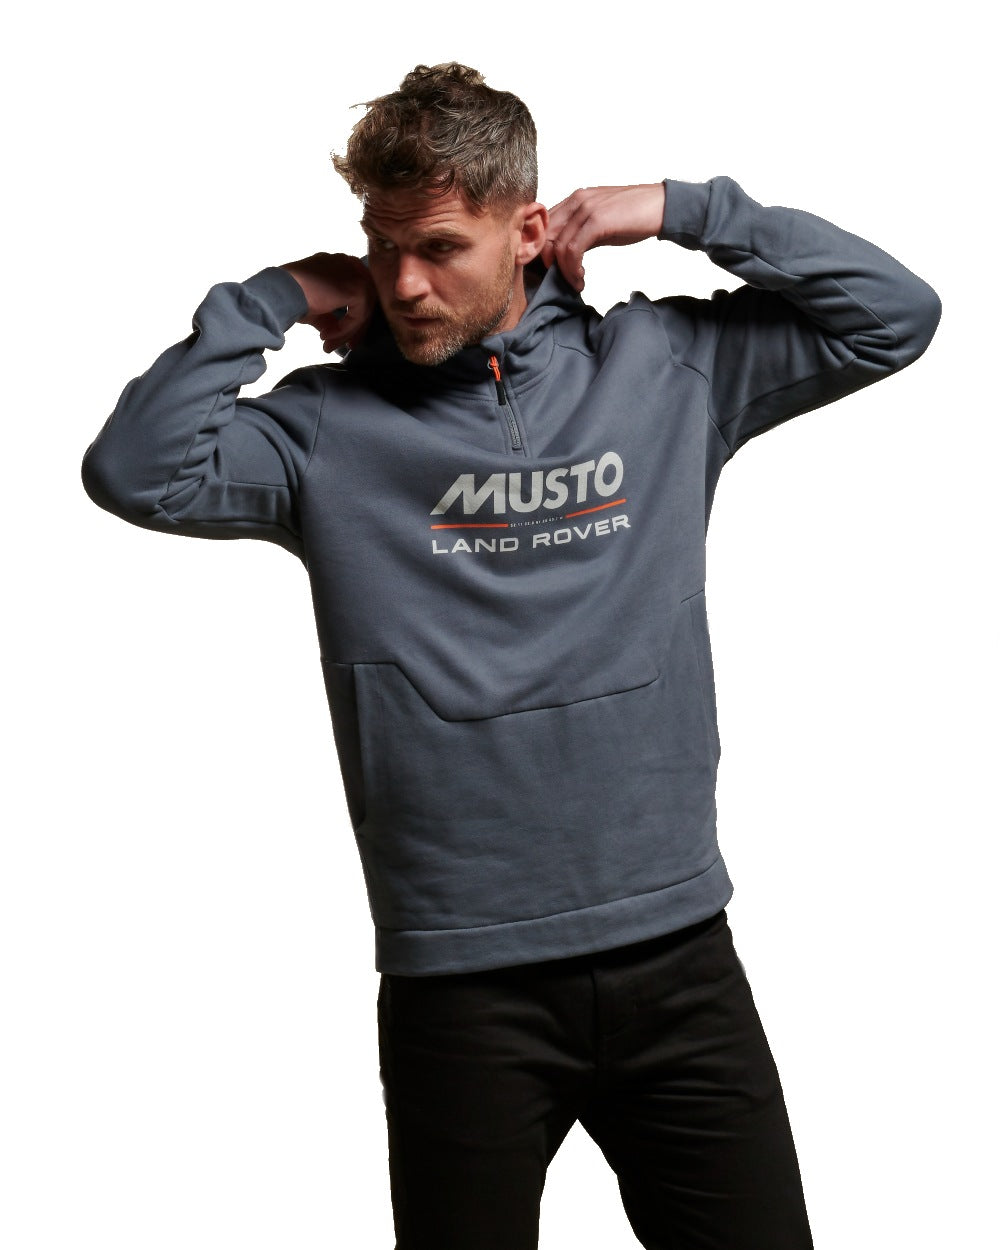 Musto Mens Land Rover Hoodie 2.0 in Carbon 